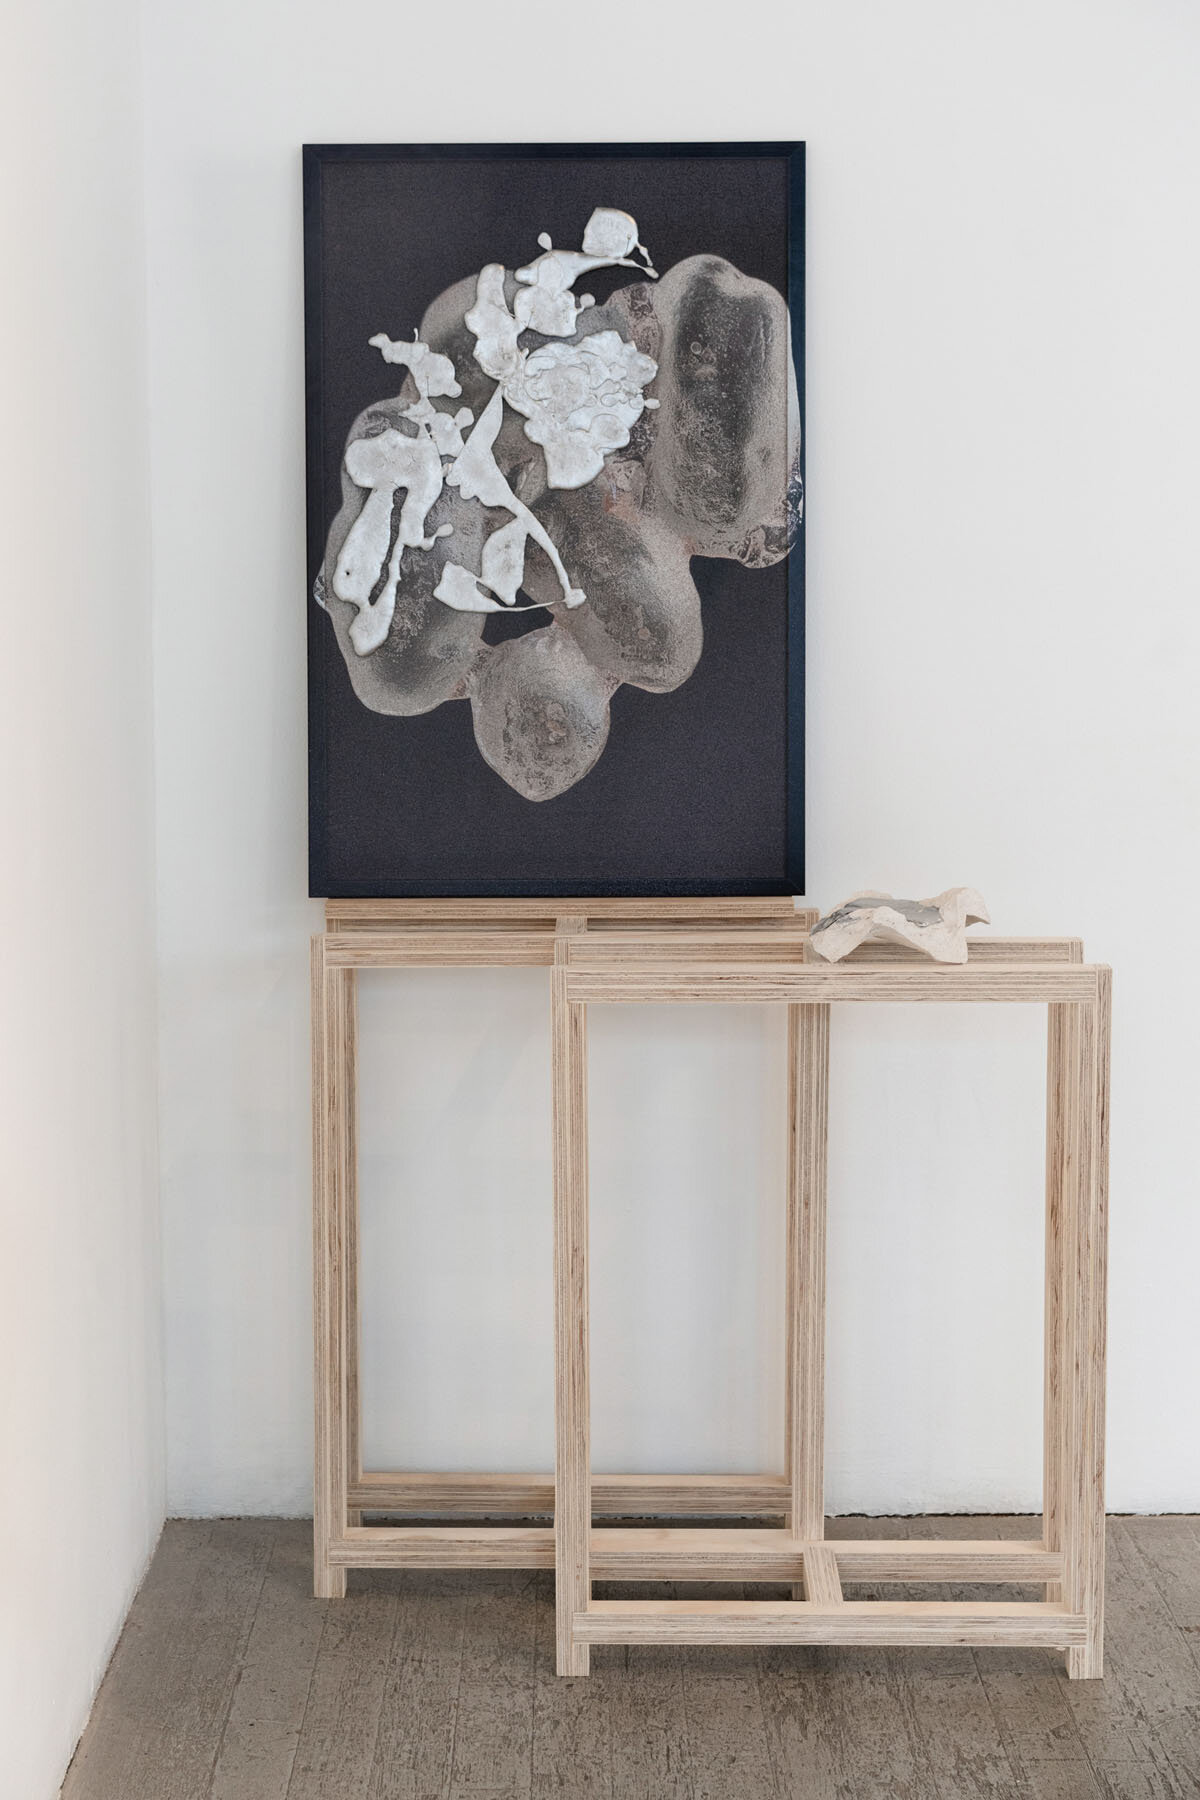   Morning with Hall Closet and Chunk of Tomorrow , 2019, acrylic on framed cork board, poured aluminum, pearl head pins, ceramic, wood, 68.5 x 35 x 21 inches 